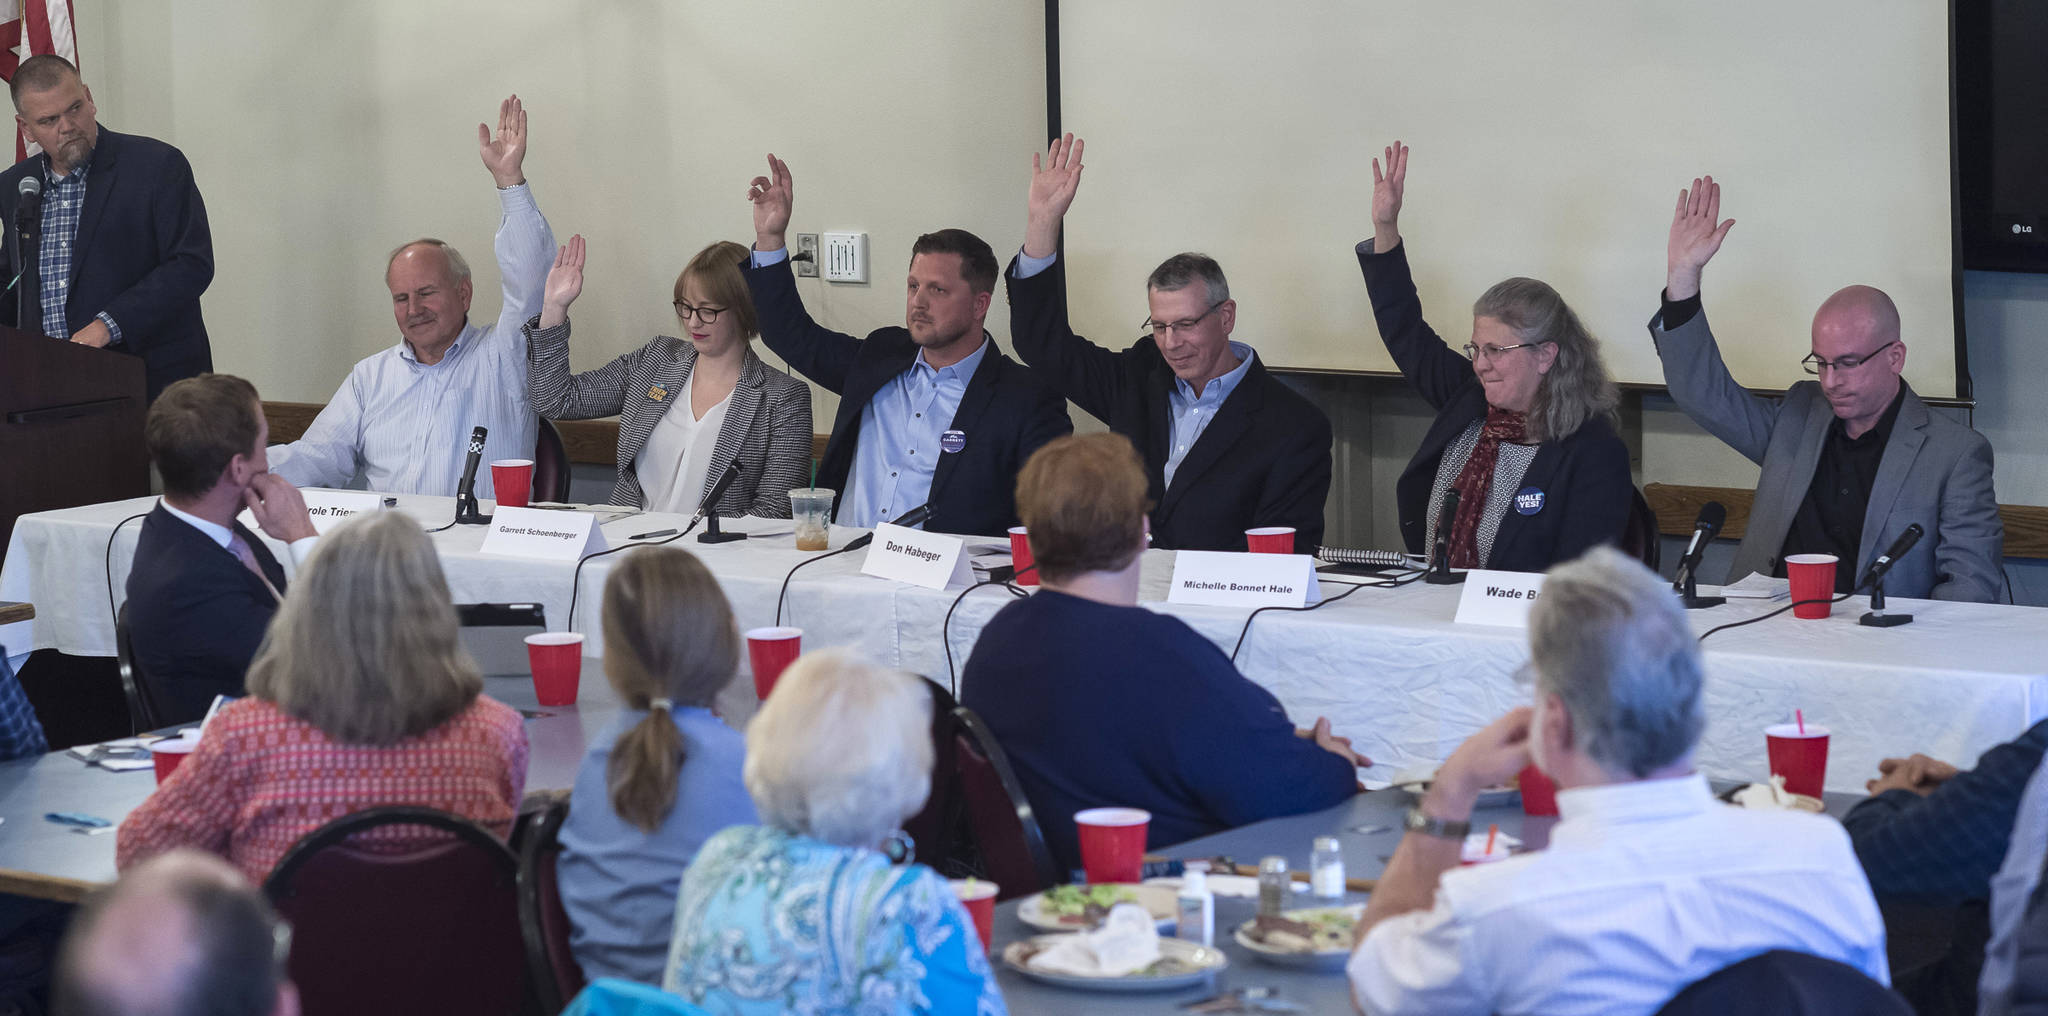 Juneau Assembly candidates for the Areawide and District 2 seats are asked to raise their hand if they support a second crossing to Douglas Island during a forum at the Juneau Chamber of Commerce during its weekly luncheon at the Moose Lodge on Thursday, Sept. 20, 2018. District 2 candidate Emil Mackey did not attend the event because of work travel. (Michael Penn | Juneau Empire)